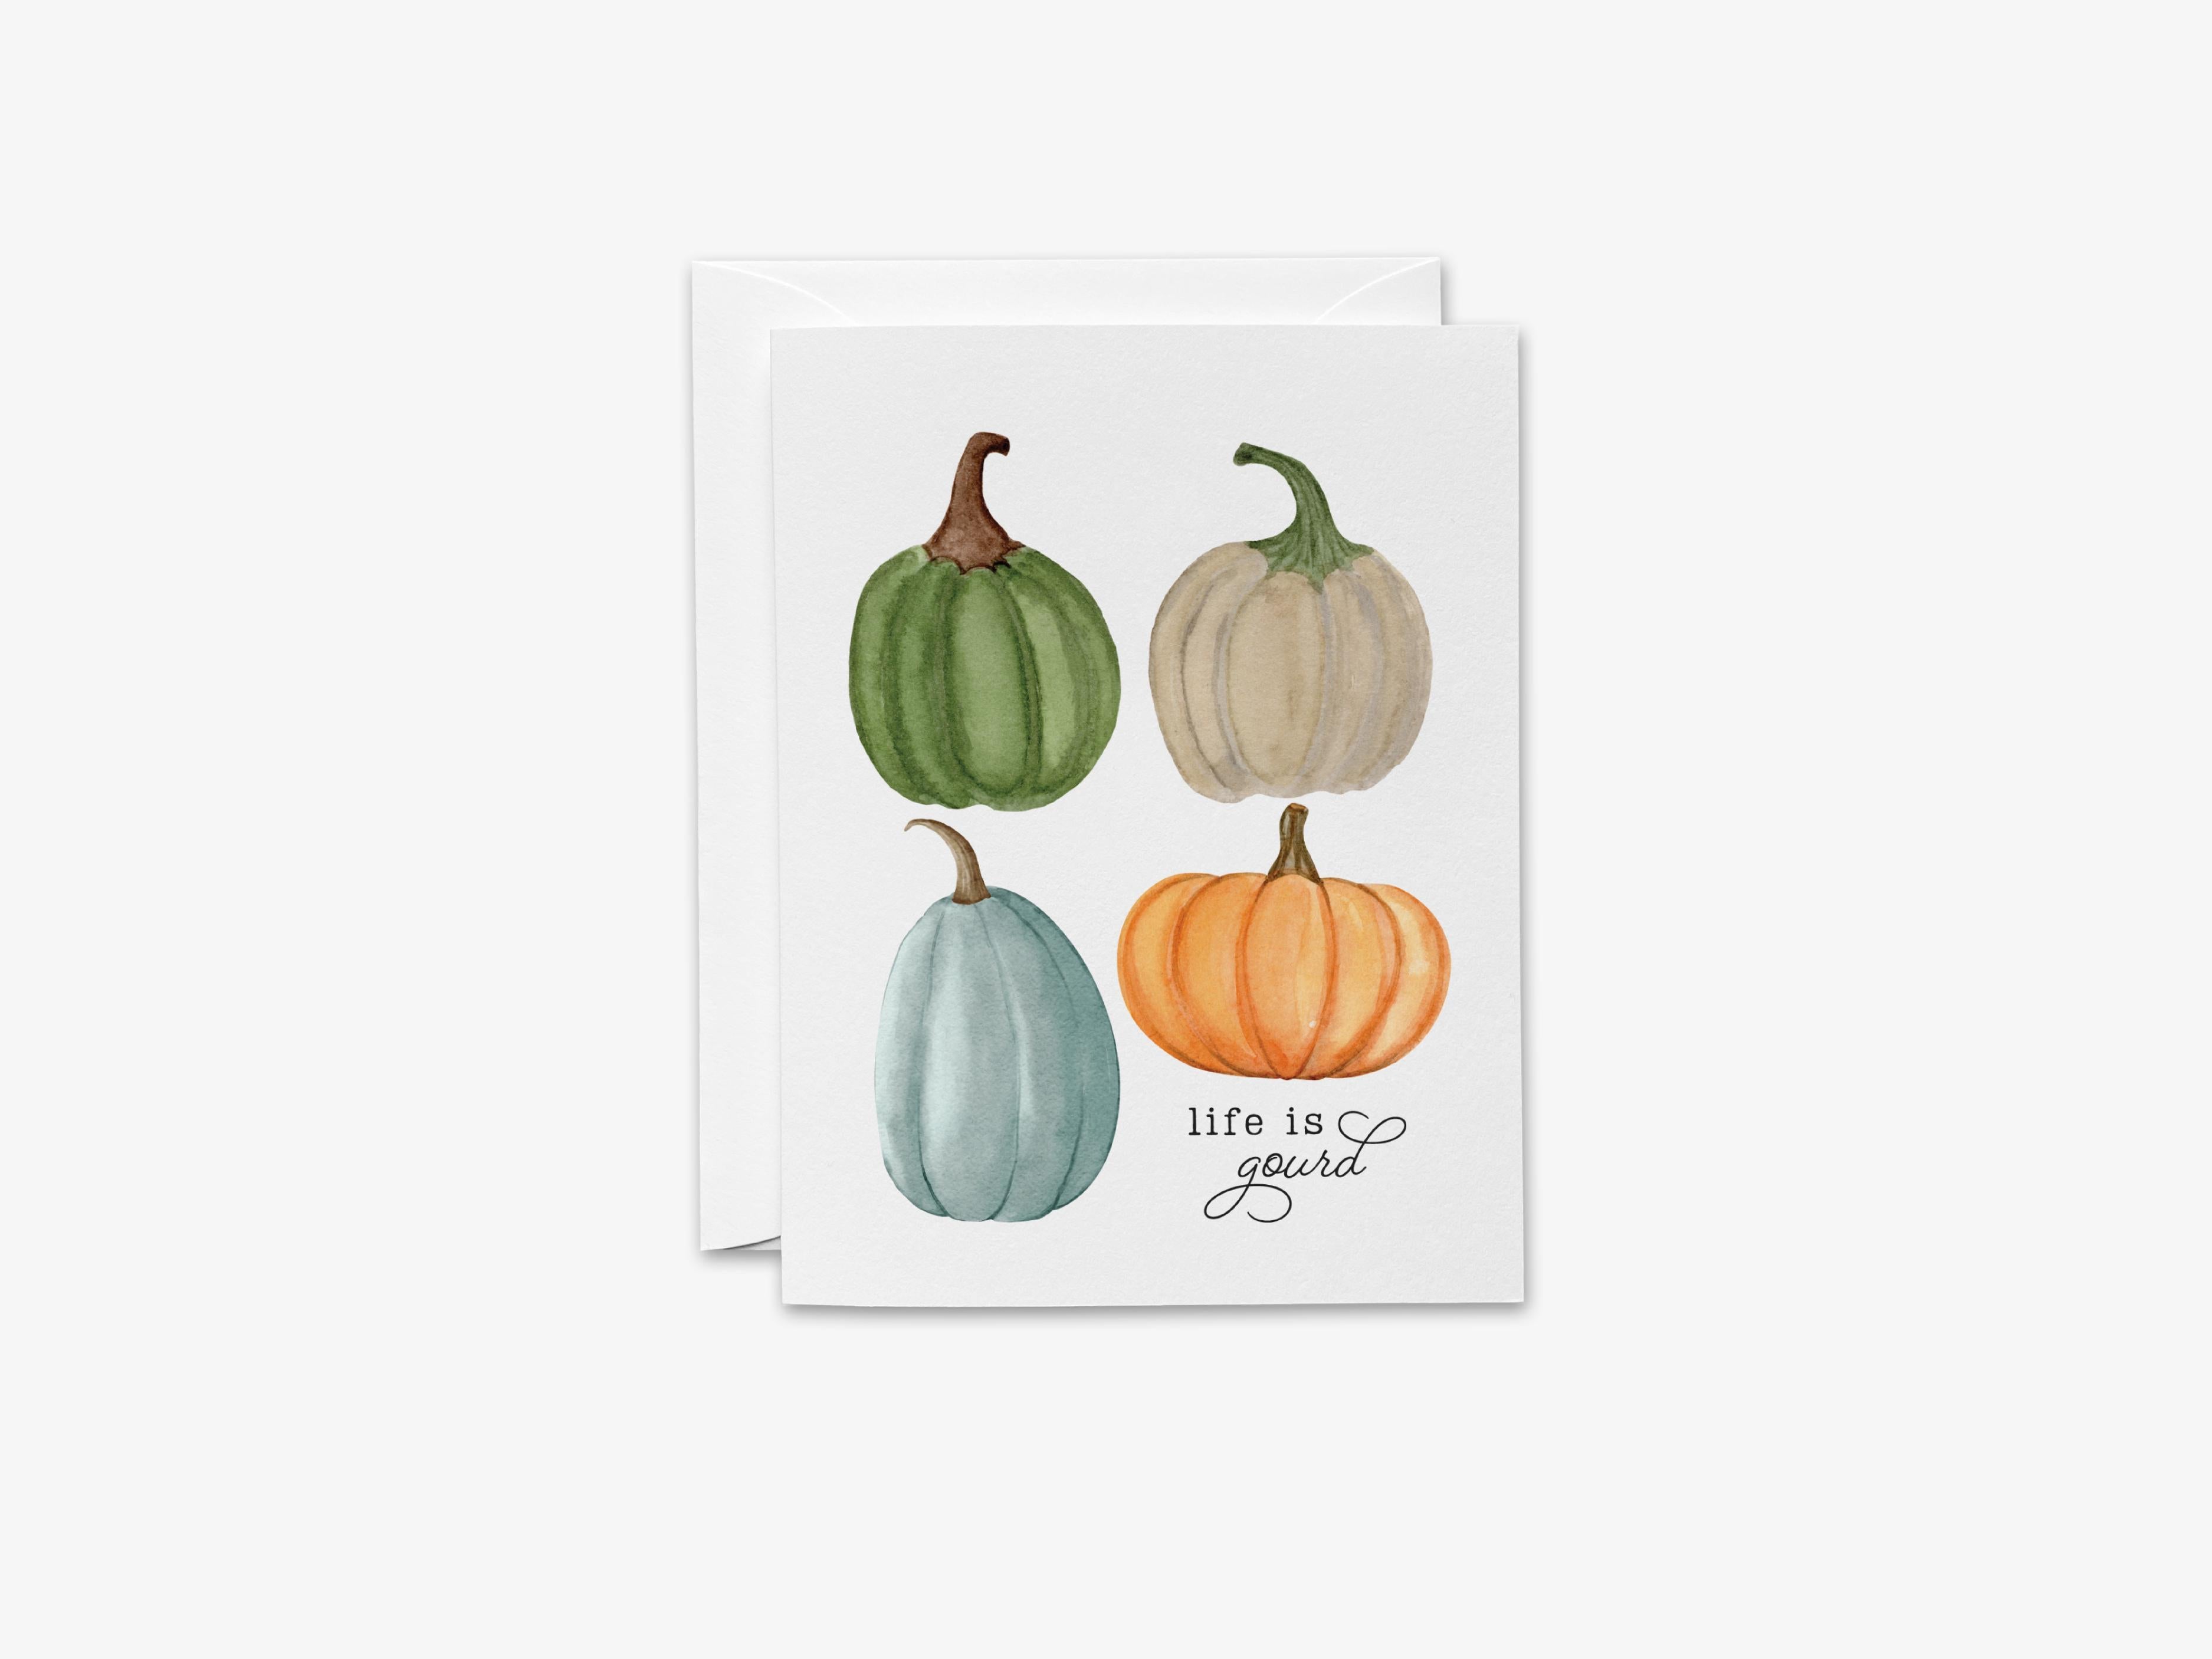 Life is Gourd Pumpkin Pun Greeting Card-These folded greeting cards are 4.25x5.5 and feature our hand-painted pumpkins and gourds, printed in the USA on 100lb textured stock. They come with a White envelope and make a great Fall season card for the pumpkin and pun lover in your life.-The Singing Little Bird